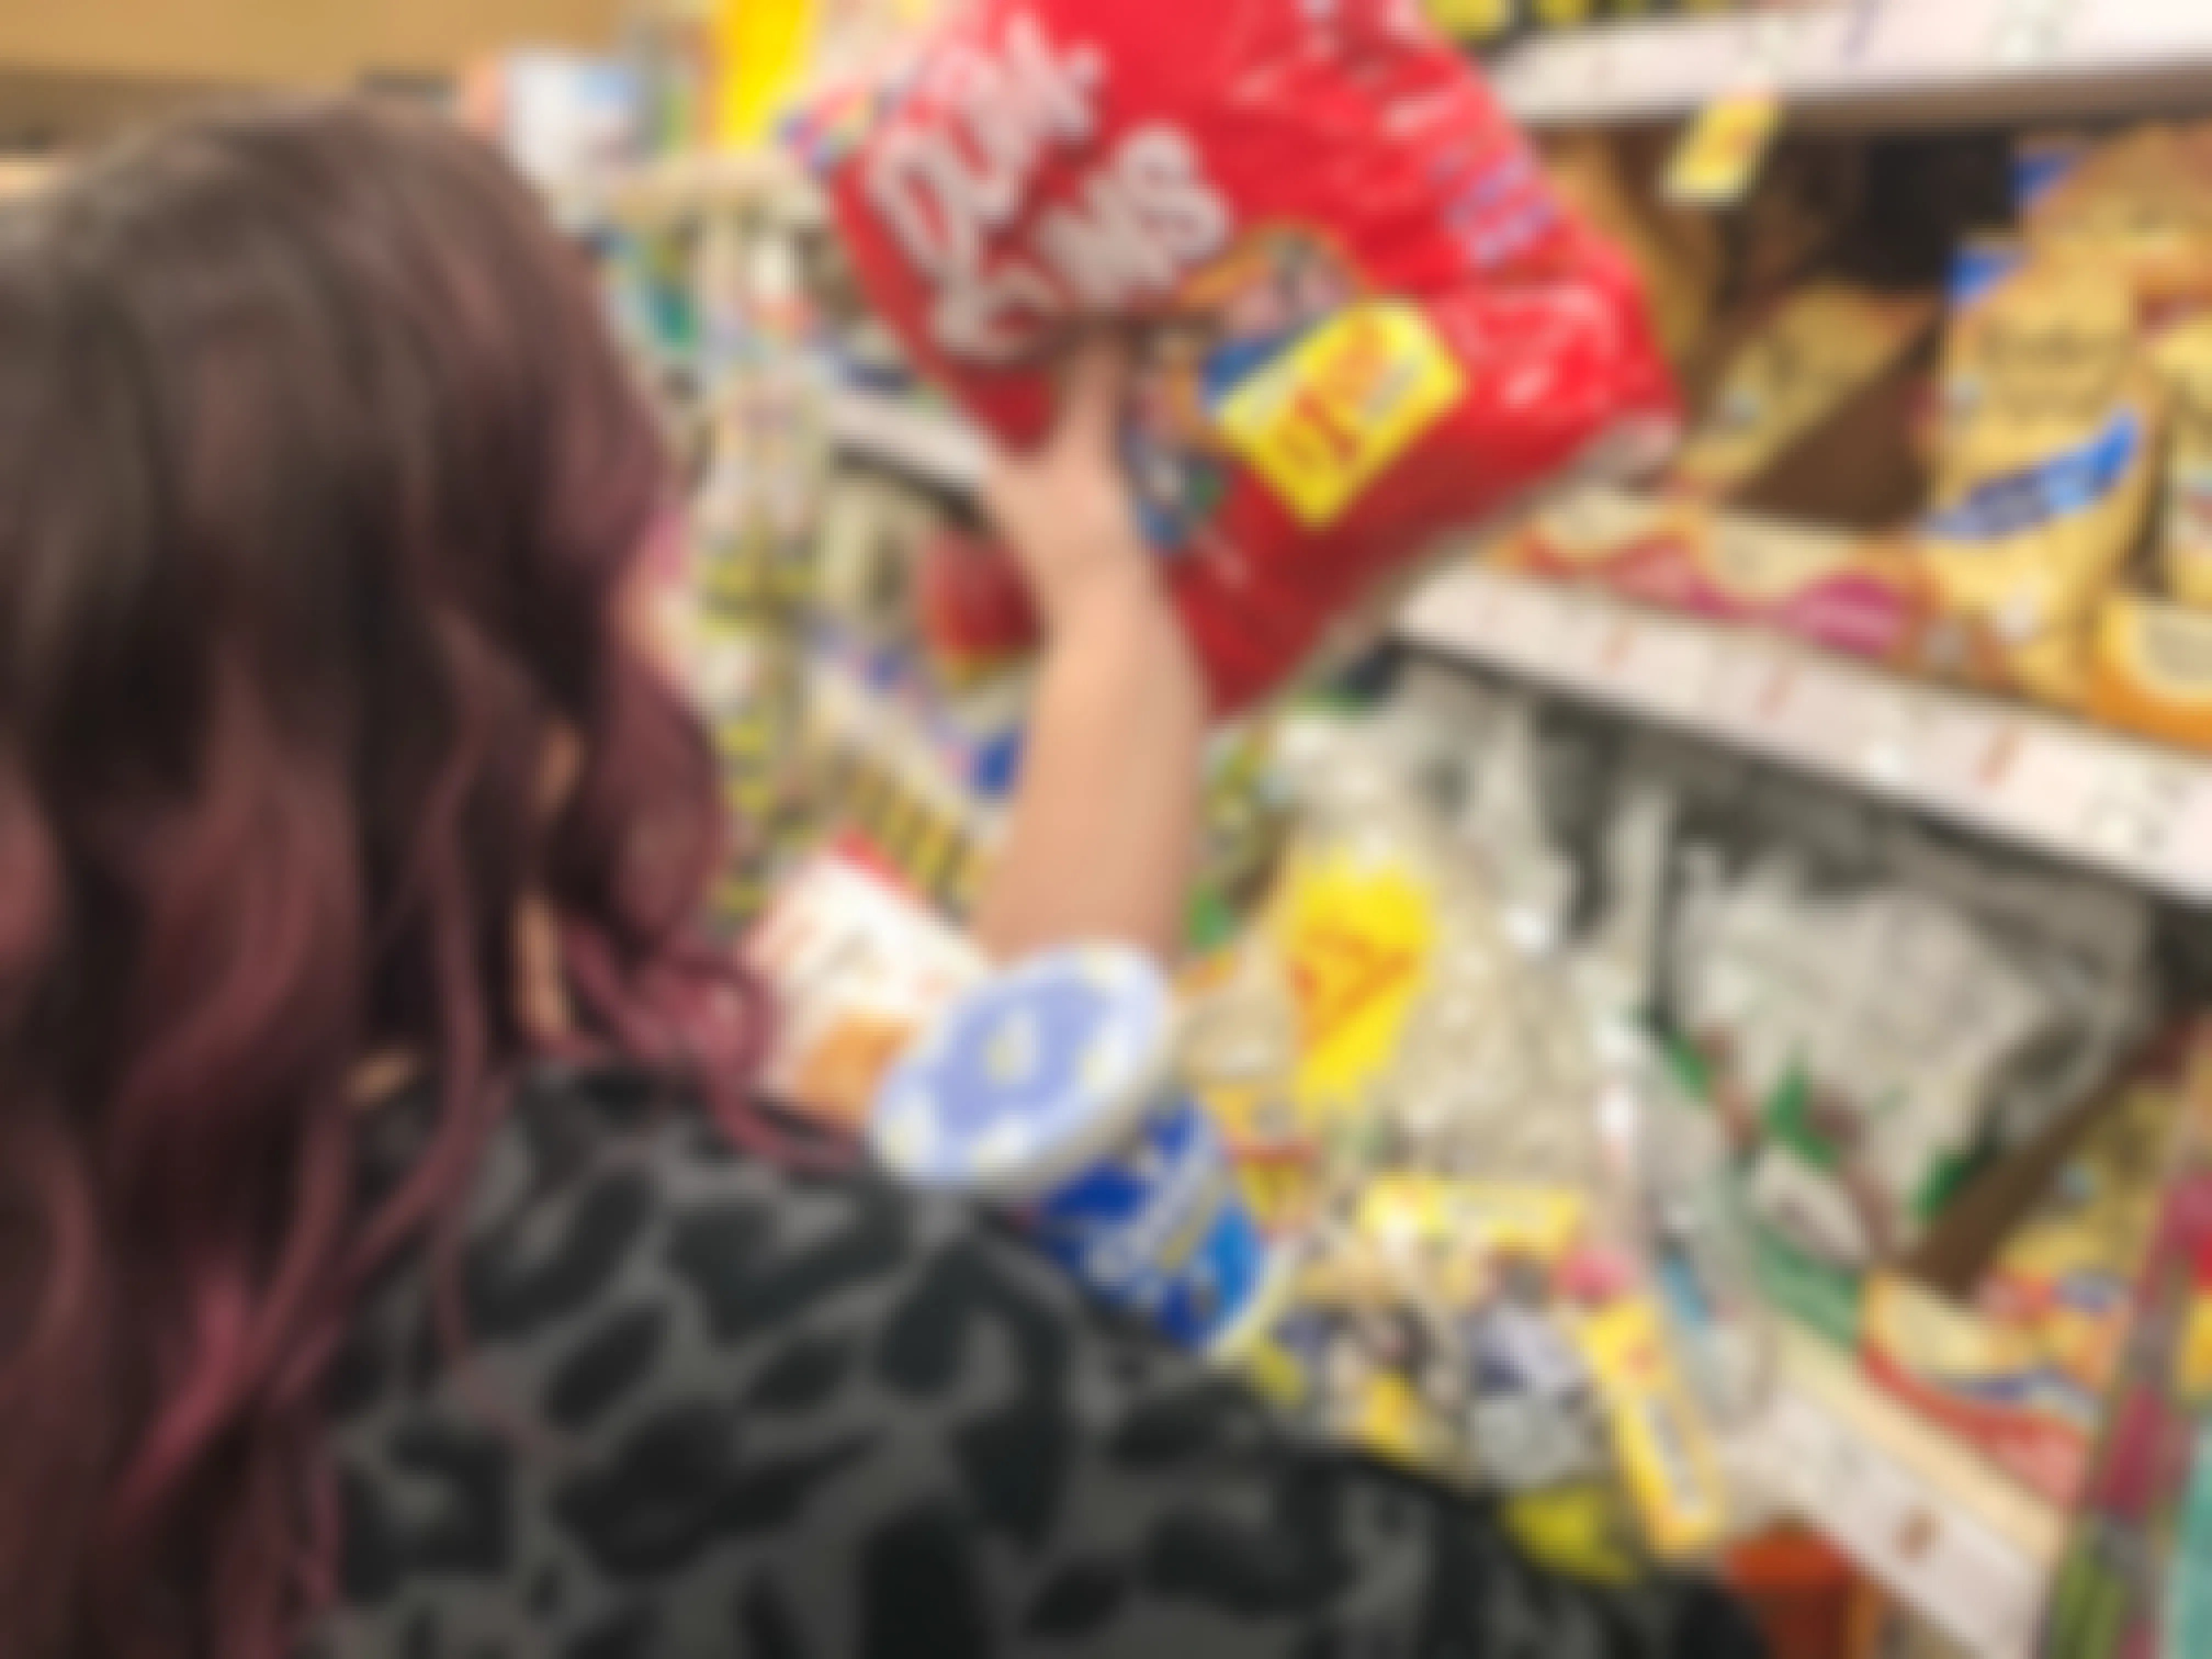 A woman grabs armfuls of candy.